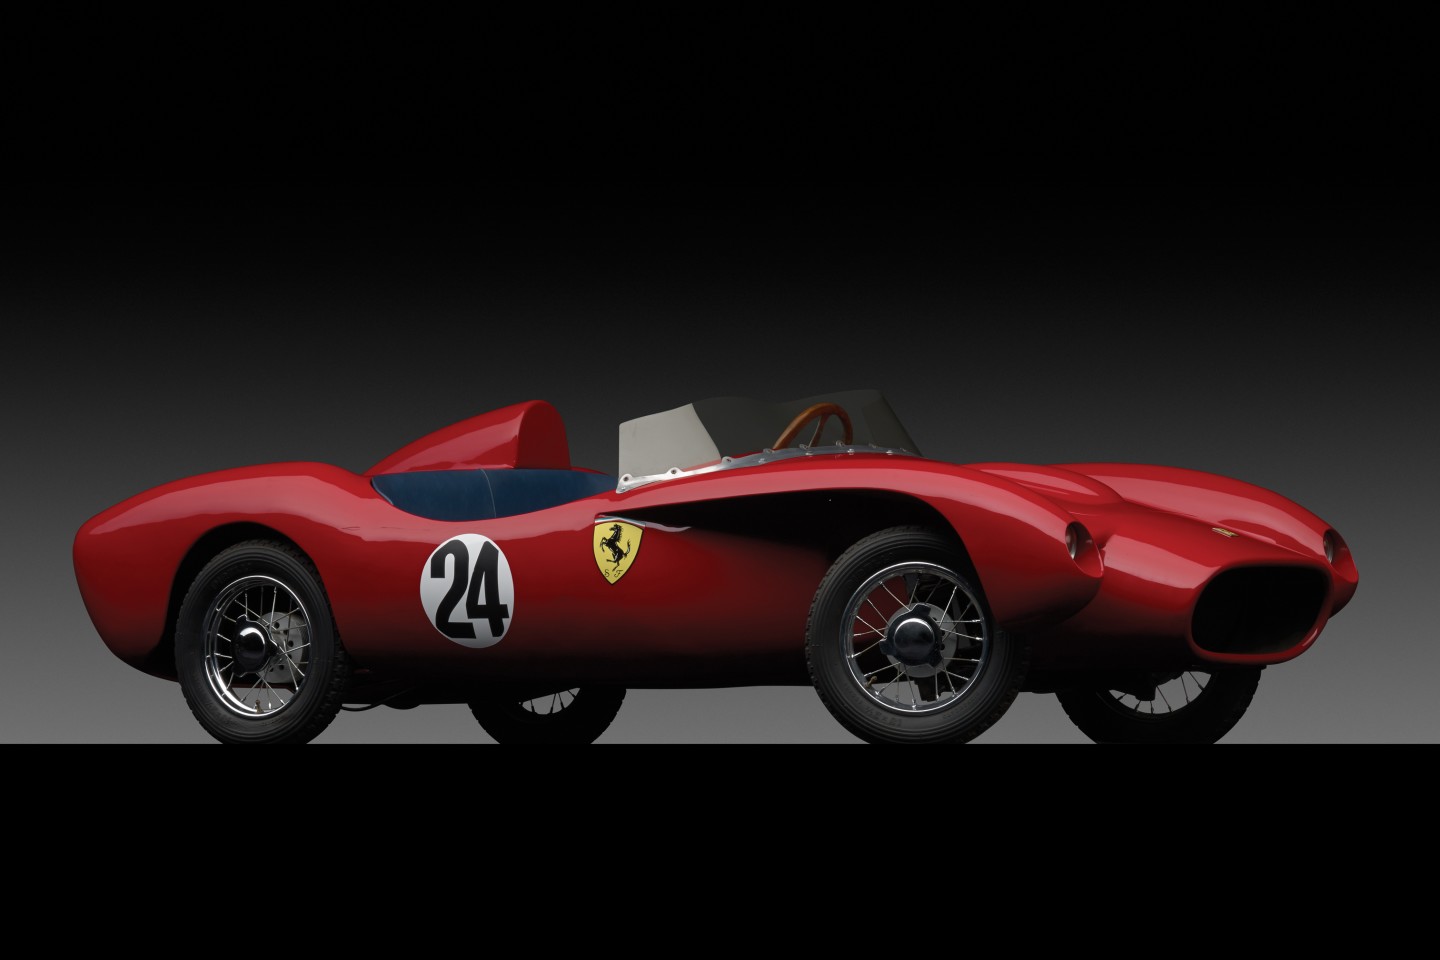 In a remarkable coincidence, history repeated itself in November 2013, when RM Auctions (now RM-Sotheby’s) sold the world’s most expensive children’s car at its annual December sale in New York. Produced by Modena Ferrarina Italia, the ½ scale Ferrari 250 Testa Rossa replica sold for $126,500. The electric-powered Testa Rossa replica has a handmade steel bodywork and was distributed in-period by the American Ferrari distributor, Luigi Chinetti Motors. It is believed that twenty-five Testa Rossa replicas were built, with fewer than five remaining worldwide. This car was previously owned by renowned Ferrari collector Kirk F. White, who had it restored to the same standards as his concours-winning full-sized Ferraris. The car still holds the world record price for a children’s car at auction.